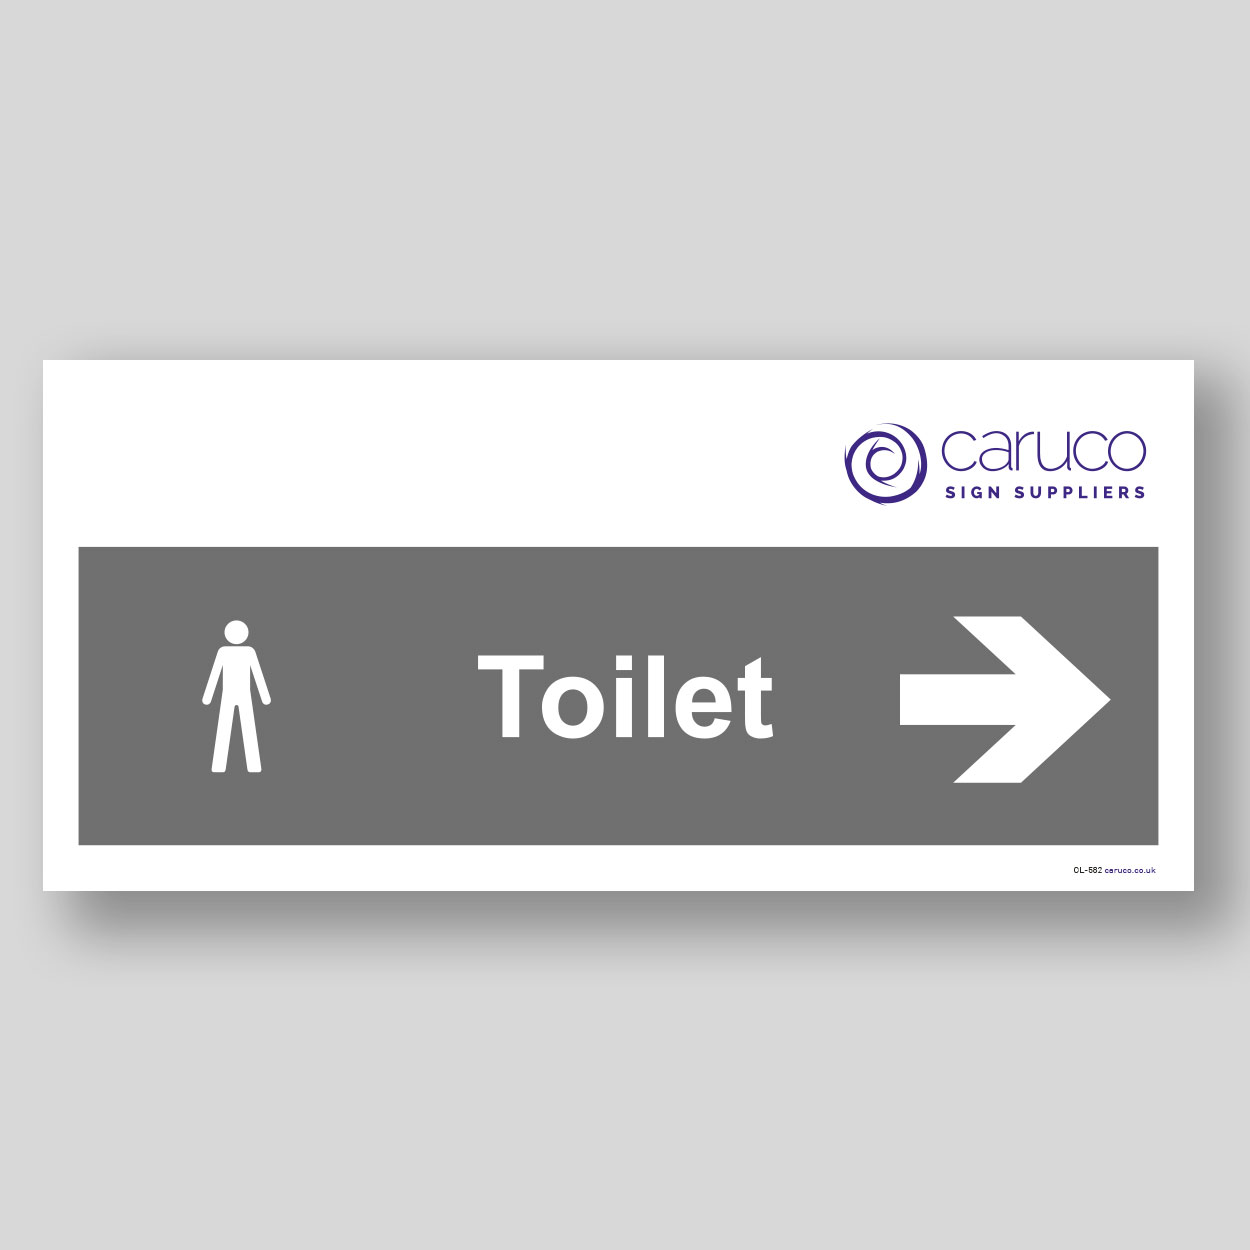 CL-582 Male toilet with right arrow